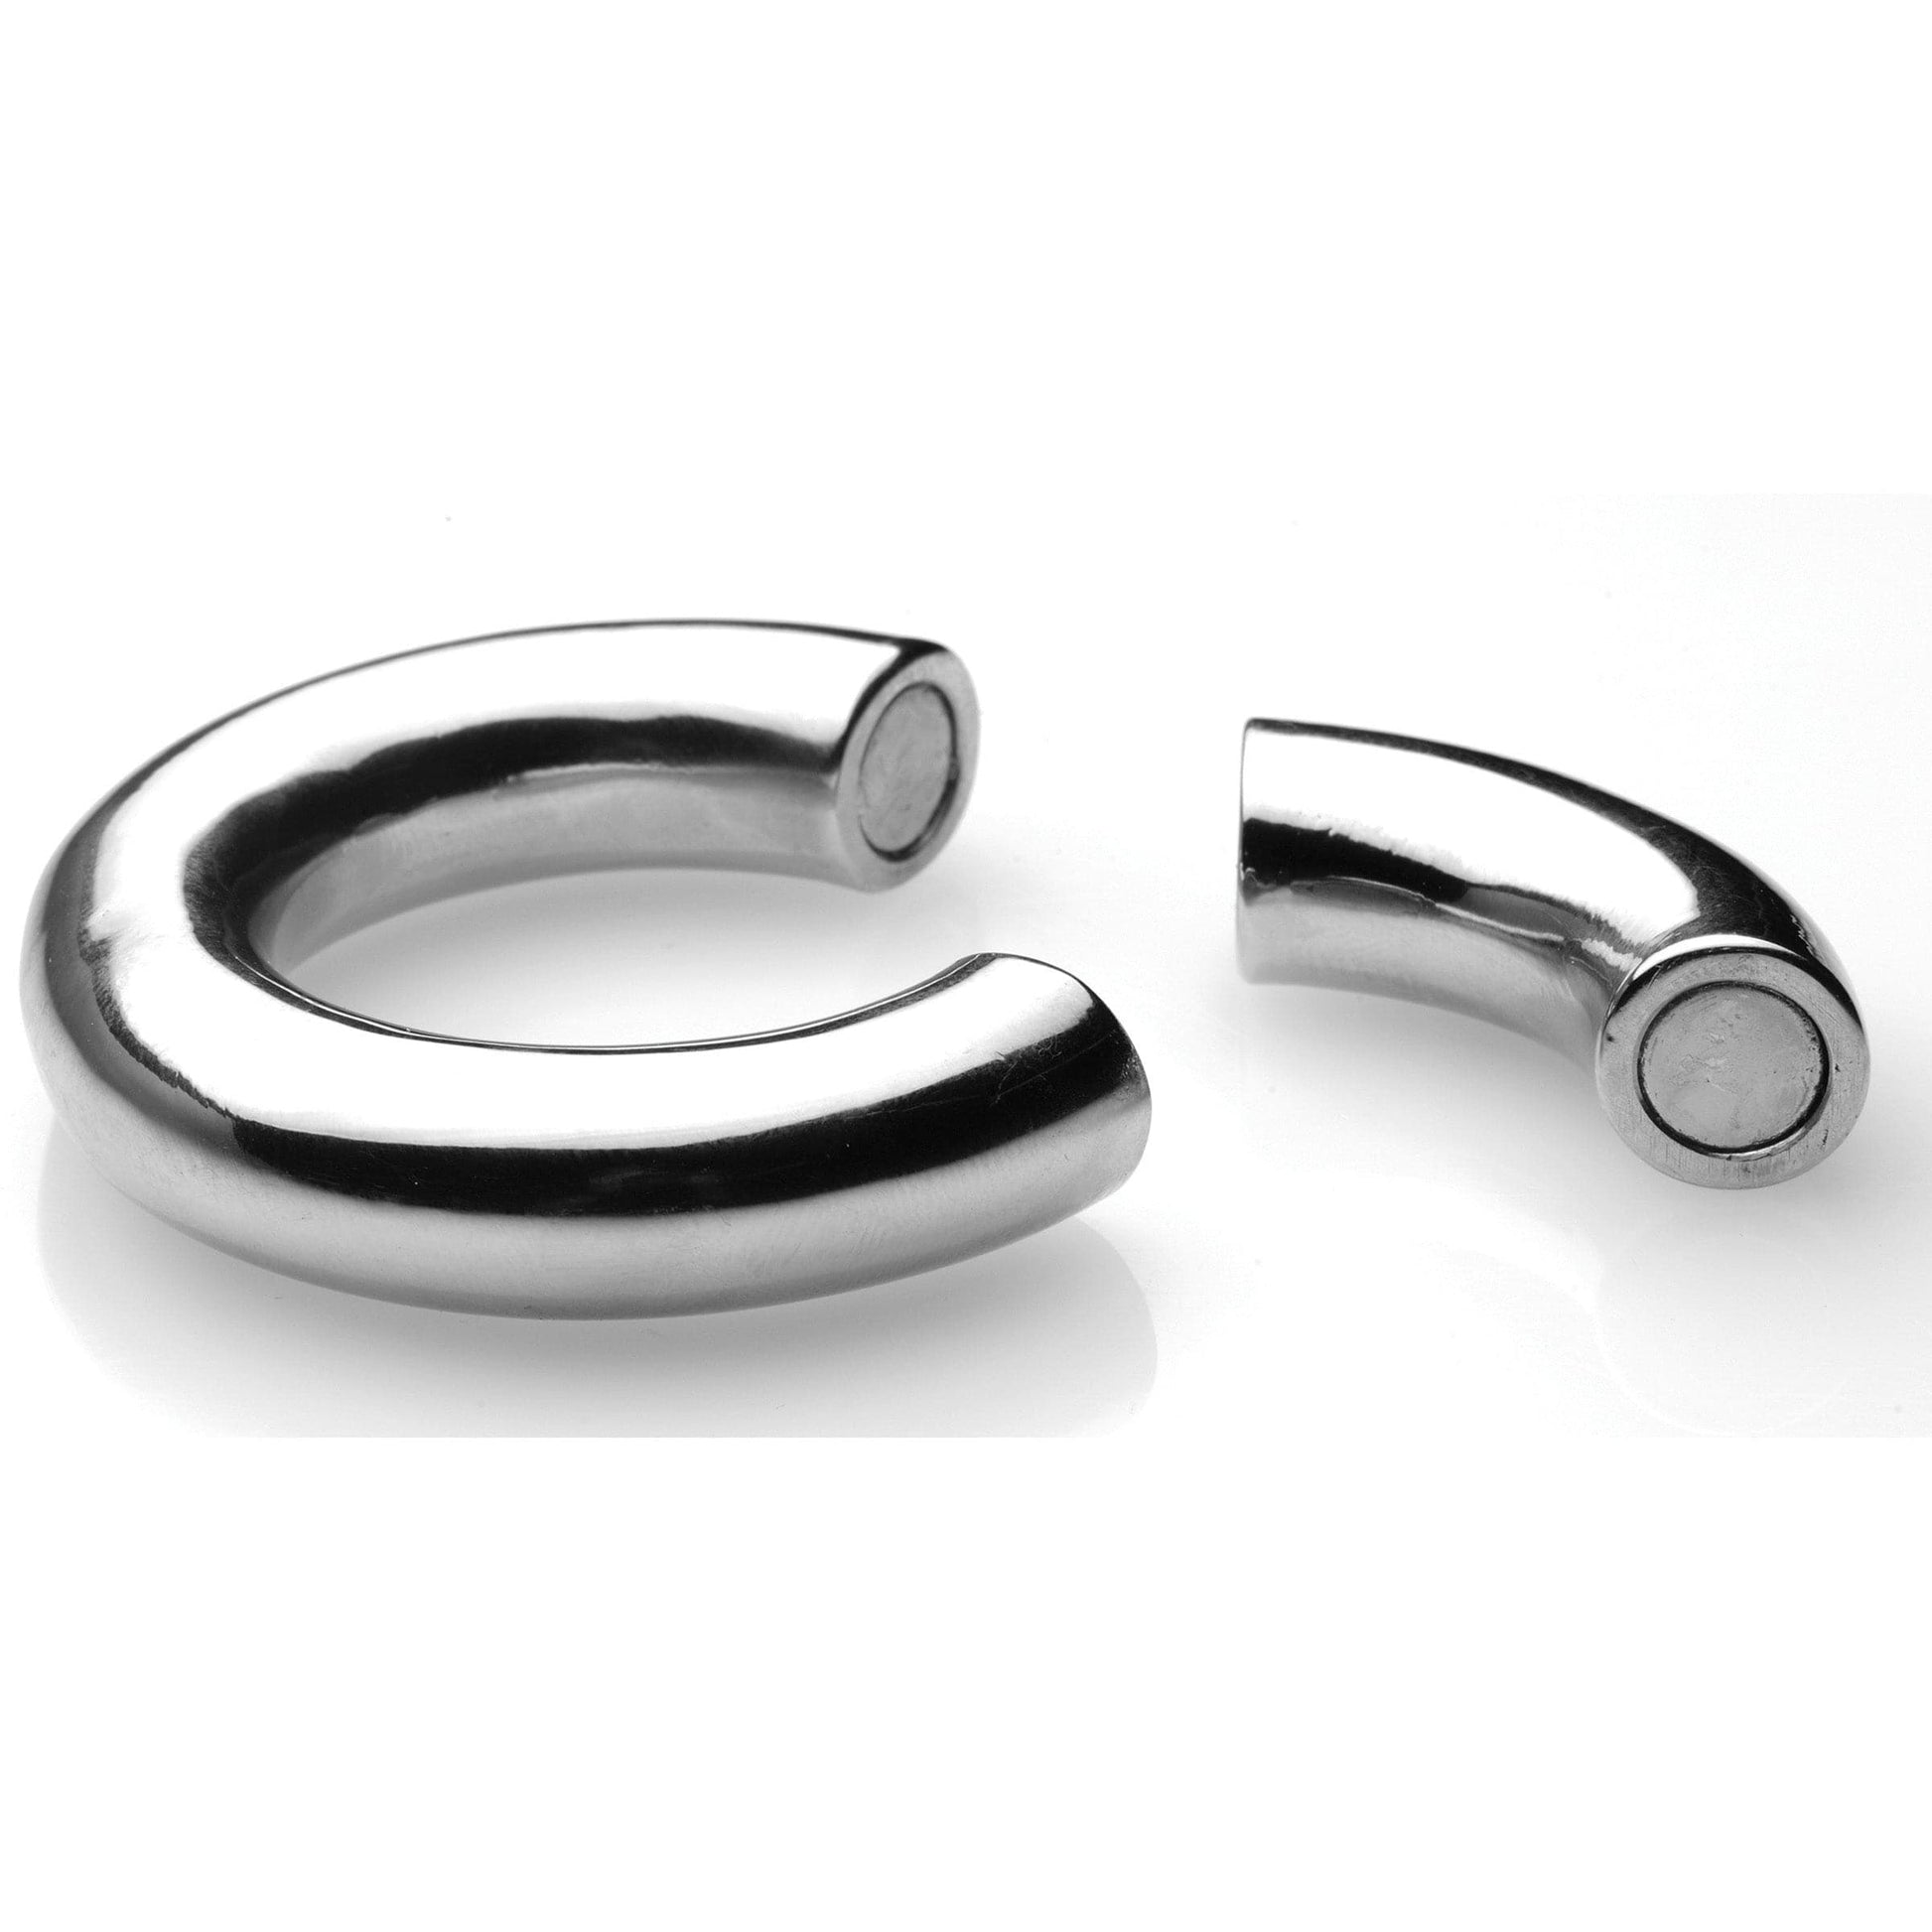 Magnetize Stainless Steel Magnetic Testicle Stretcher